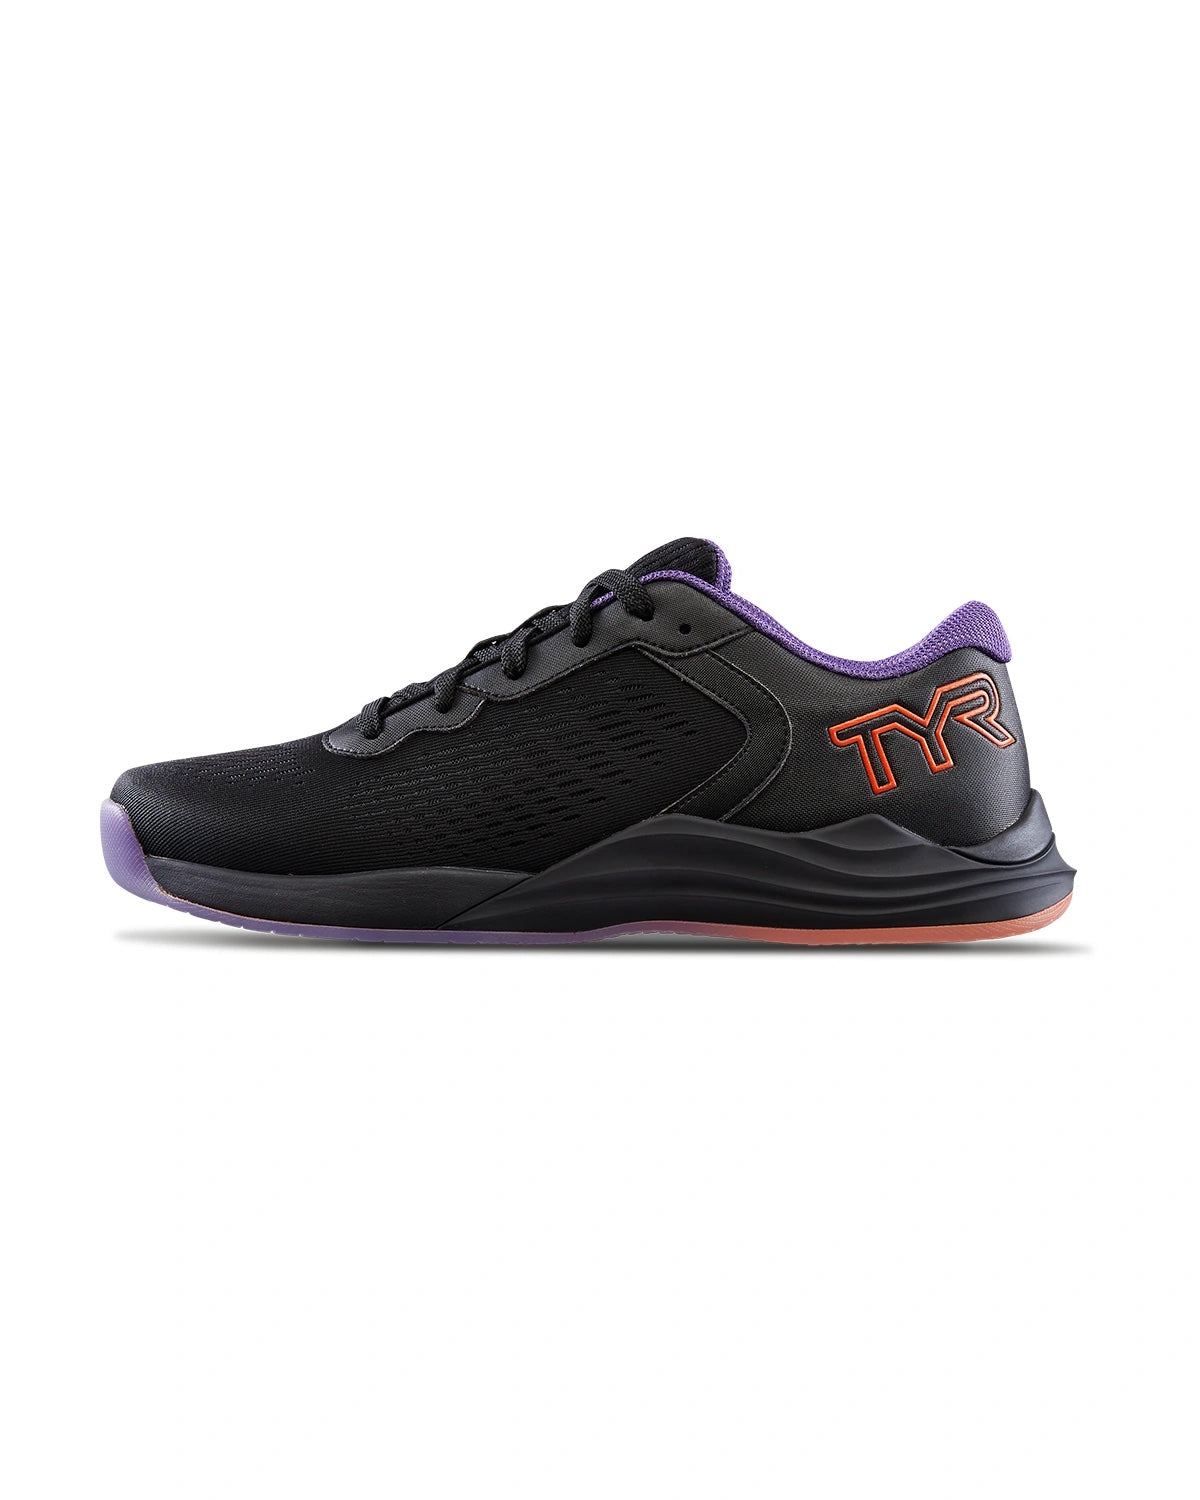 Tyr Trainer CXT-1